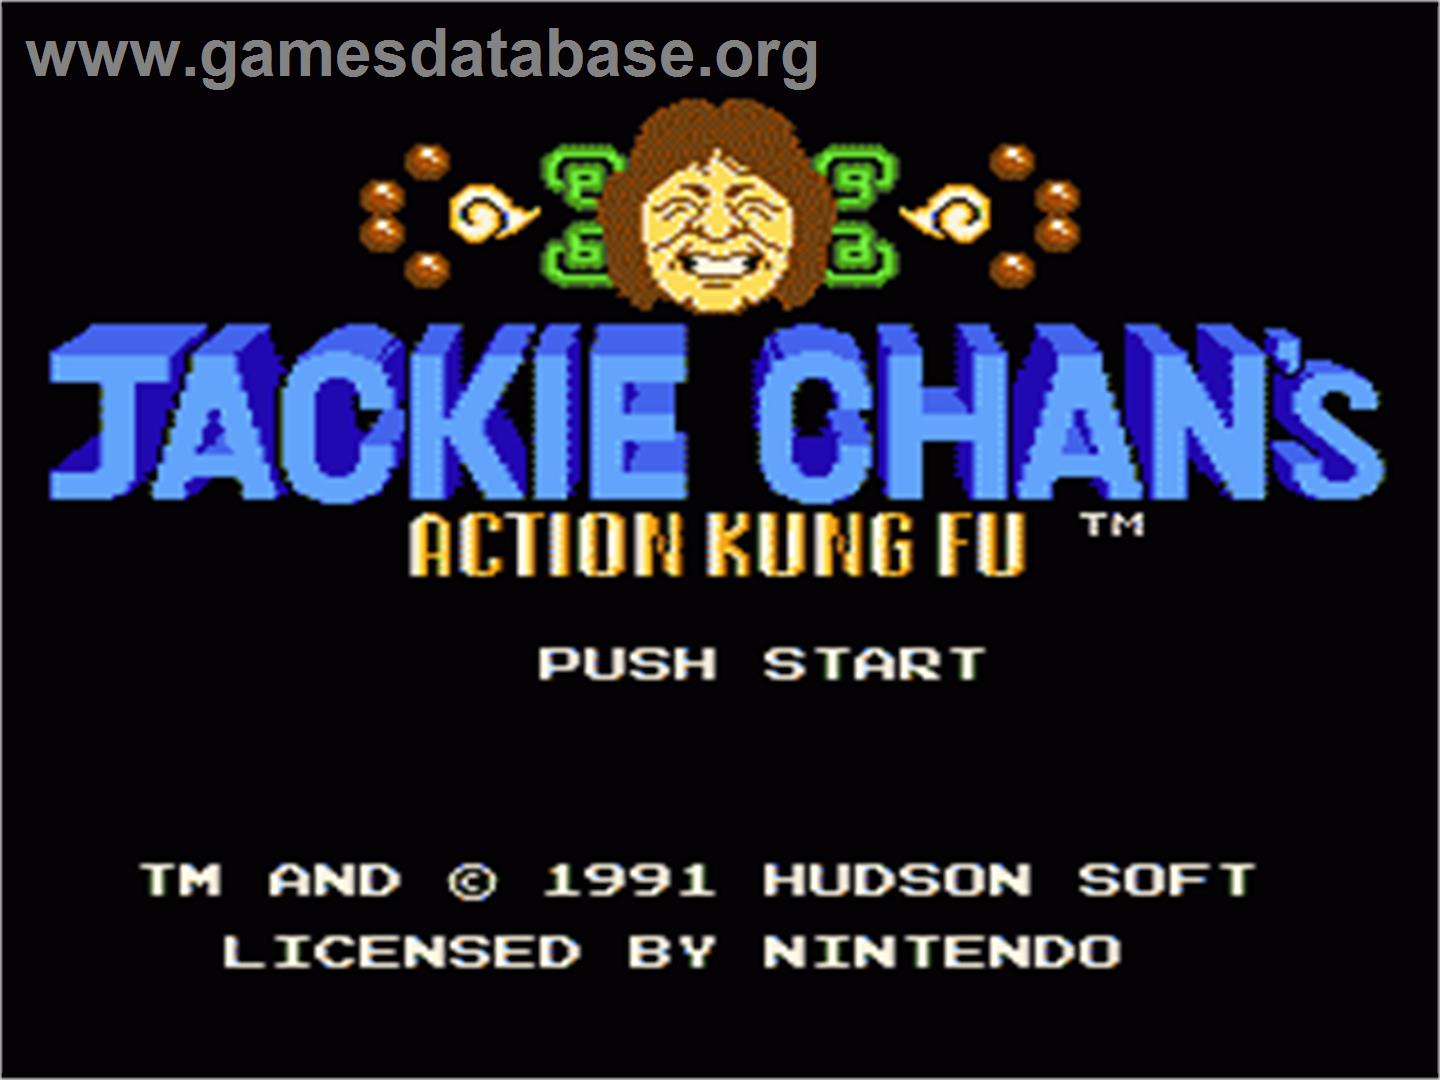 Jackie Chan's Action Kung Fu - Nintendo NES - Artwork - Title Screen